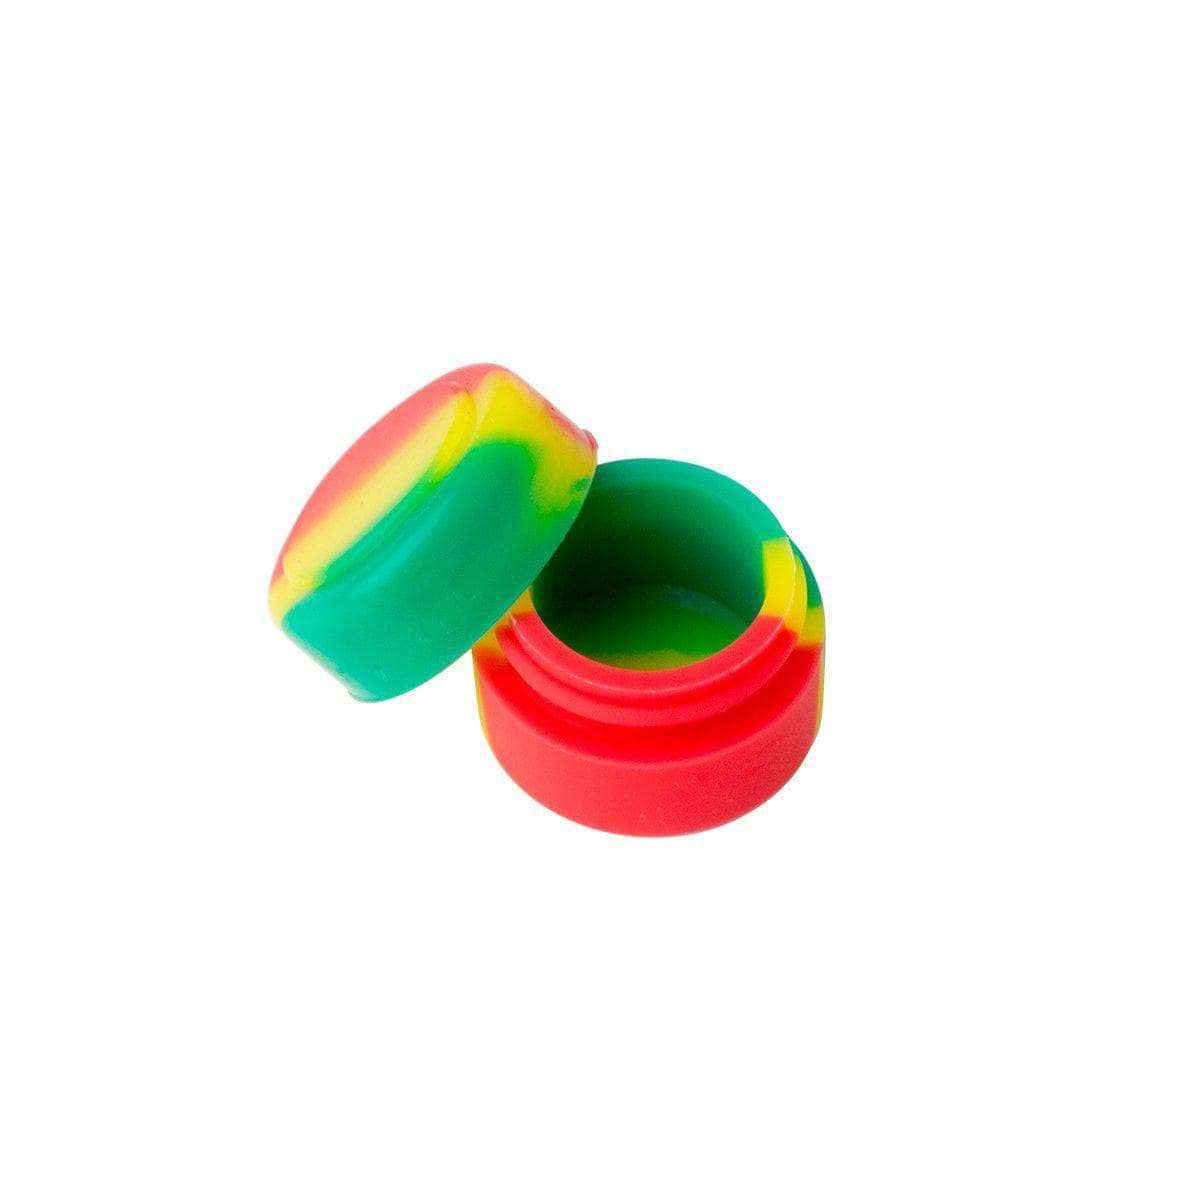 Black, yellow, green, red colored Silicon was container